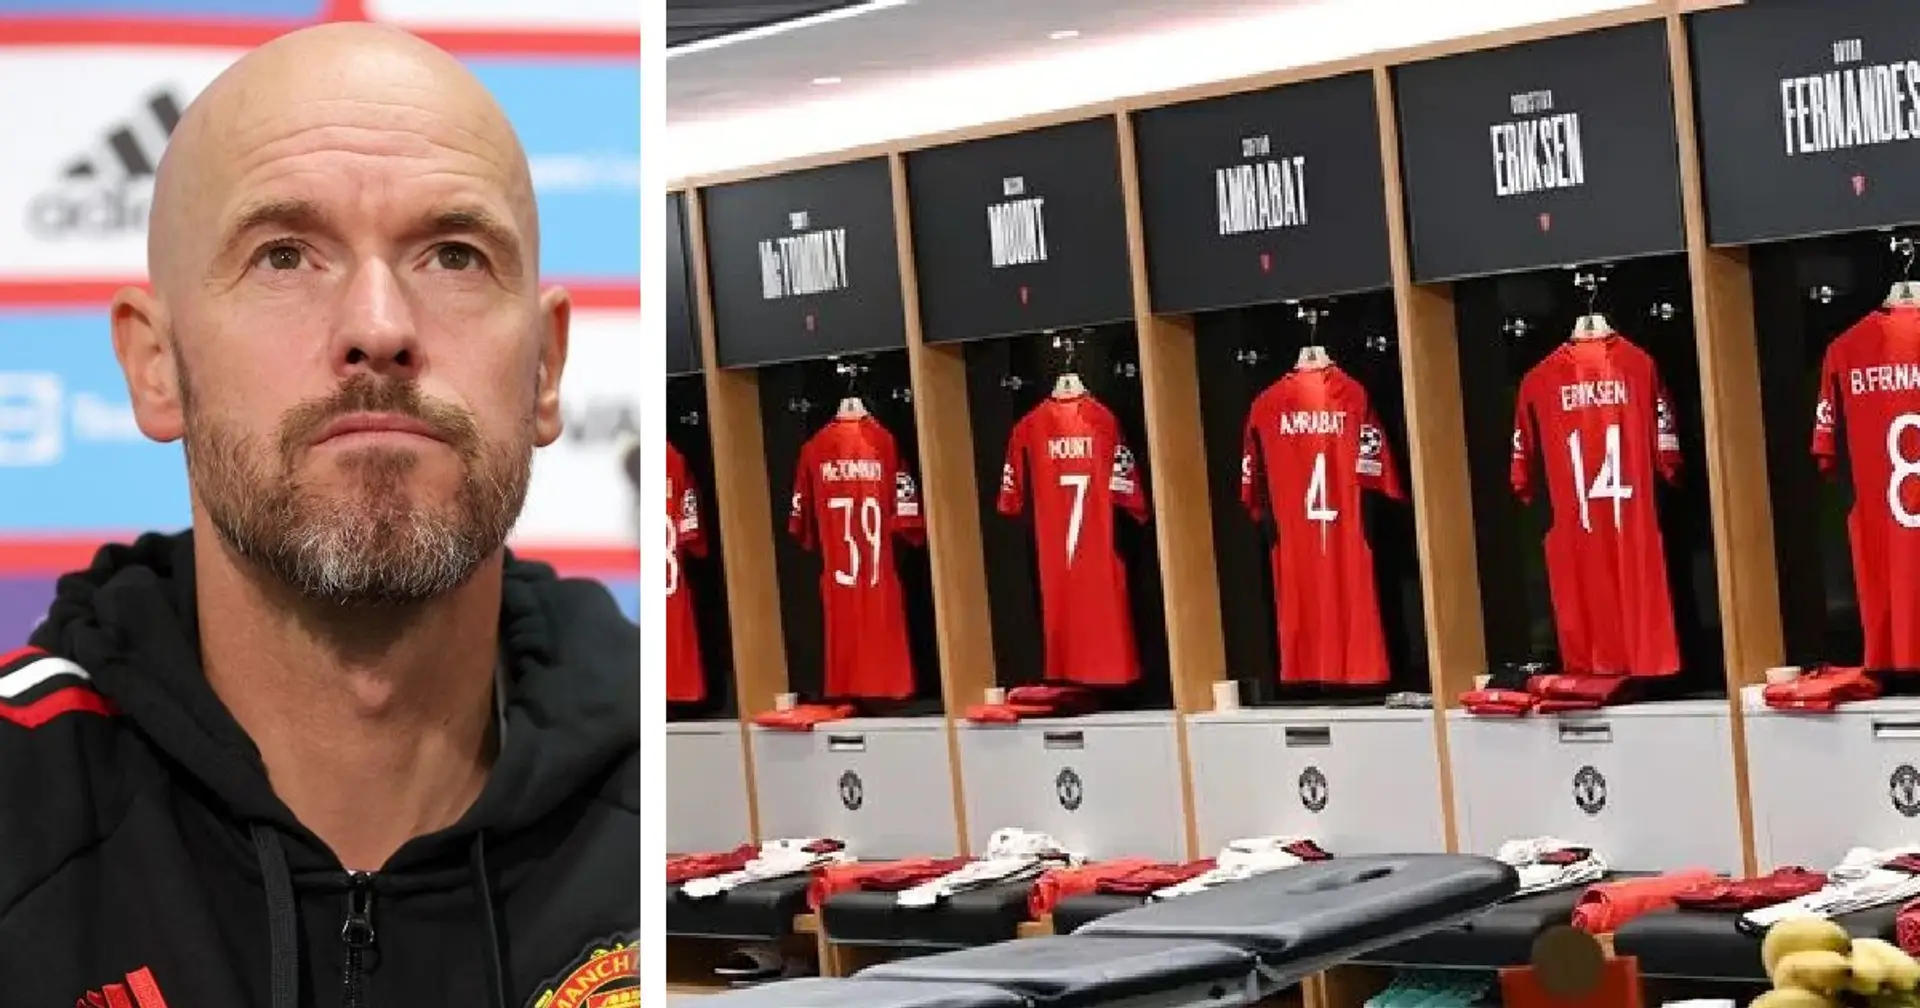 Ten Hag names 'smart player' in Man United squad - not Bruno